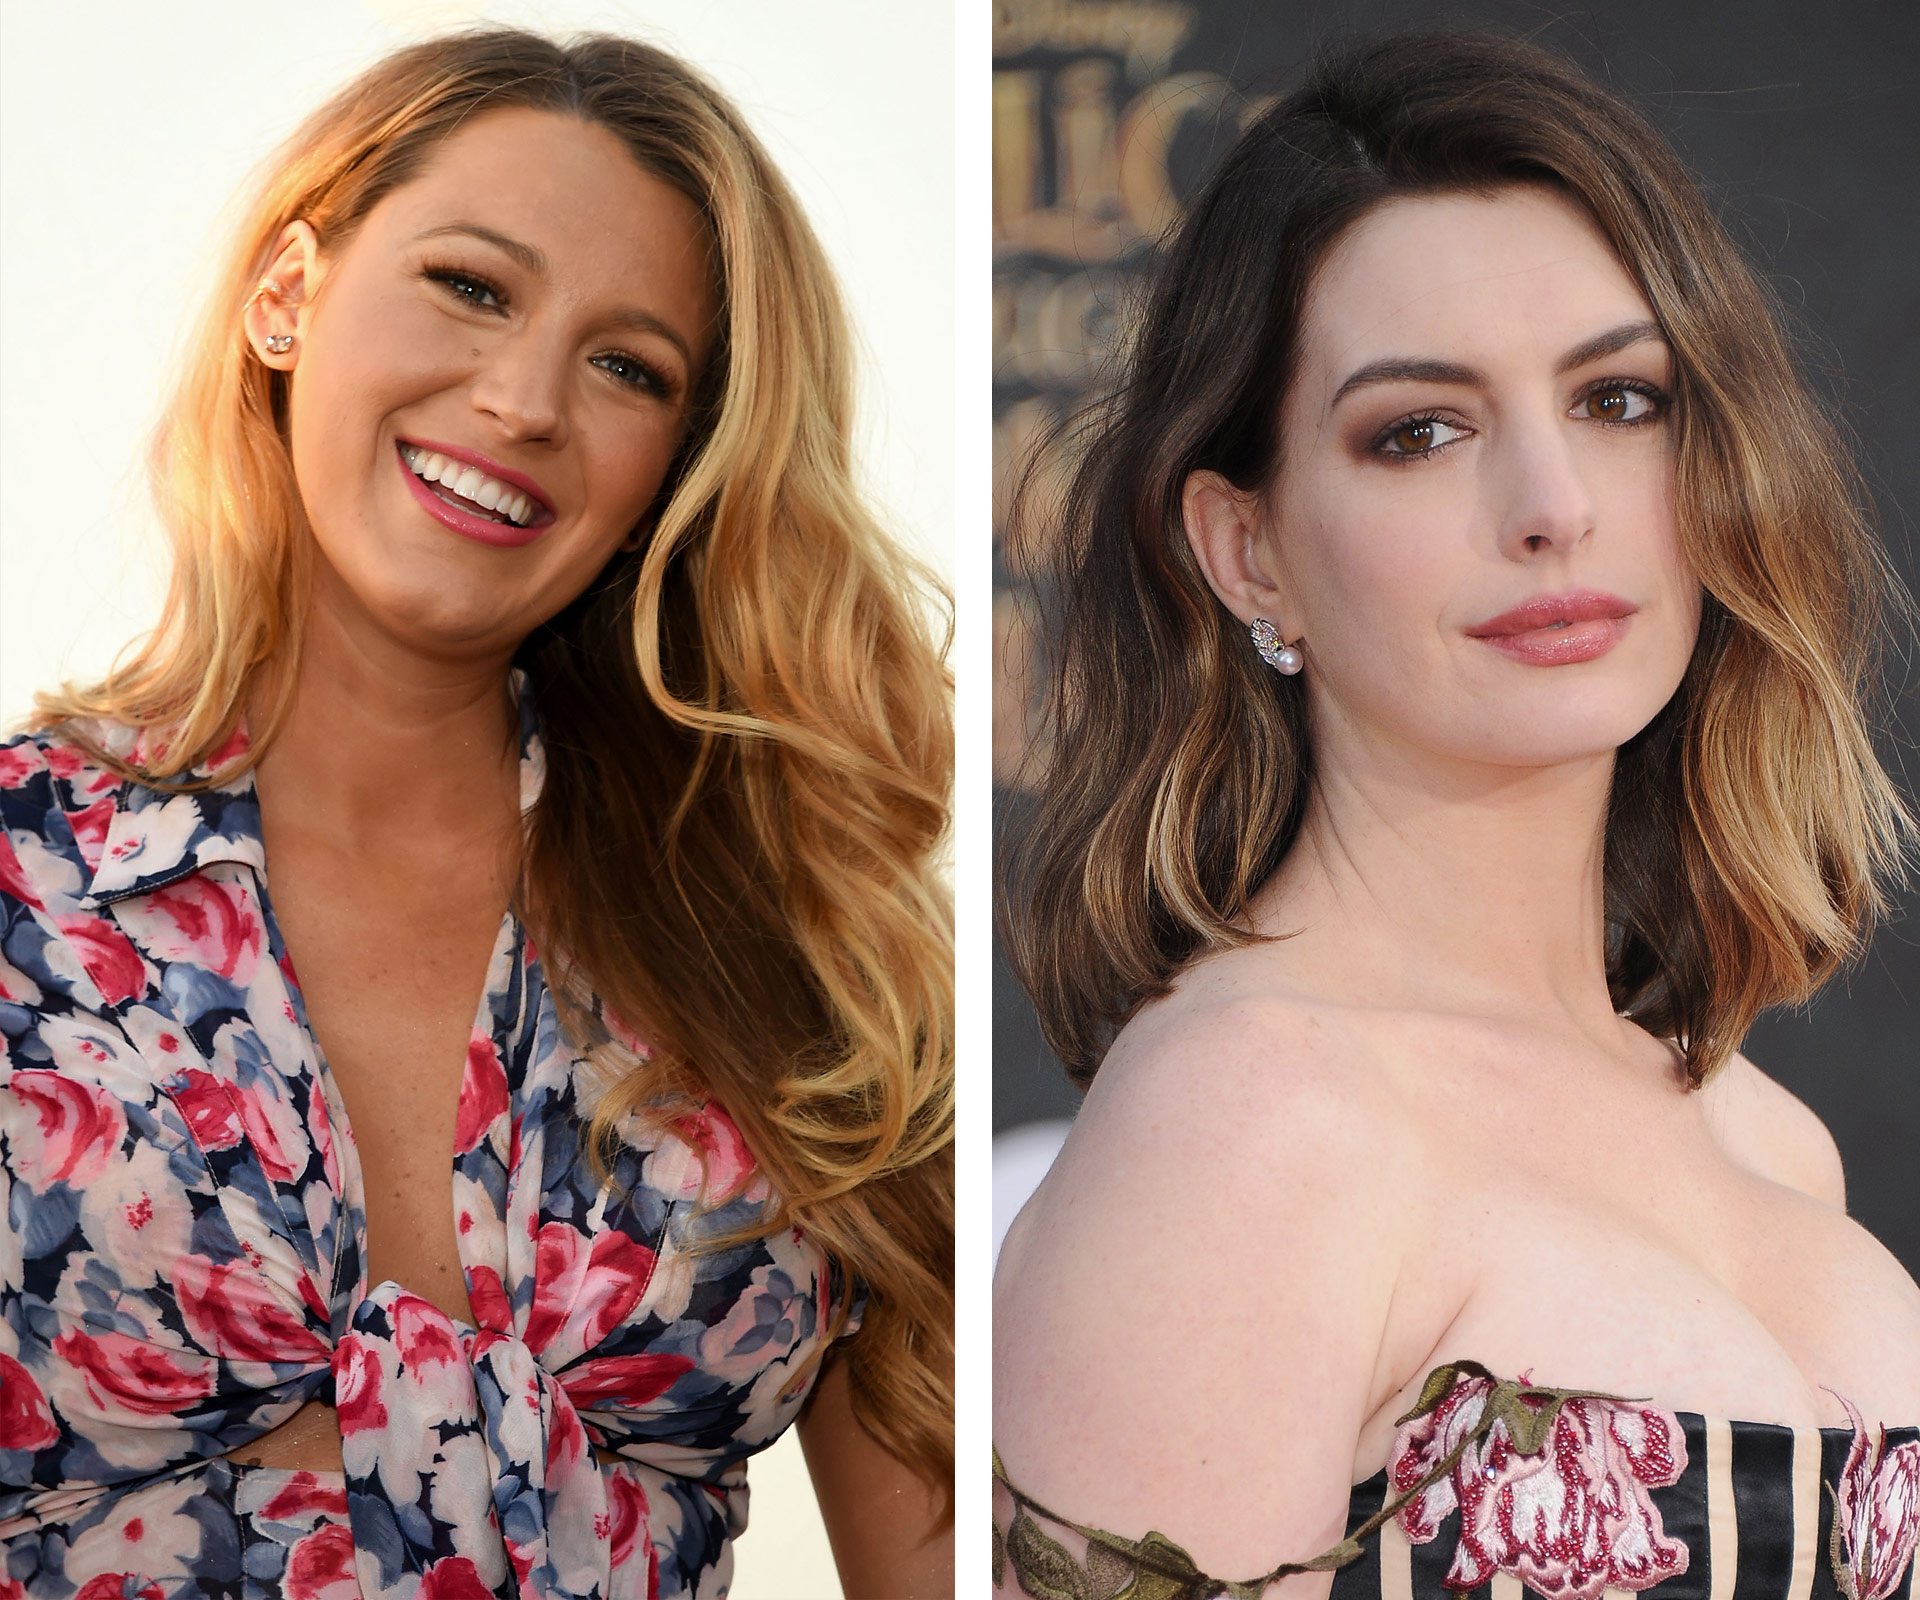 Blake Lively and Anne Hathaway